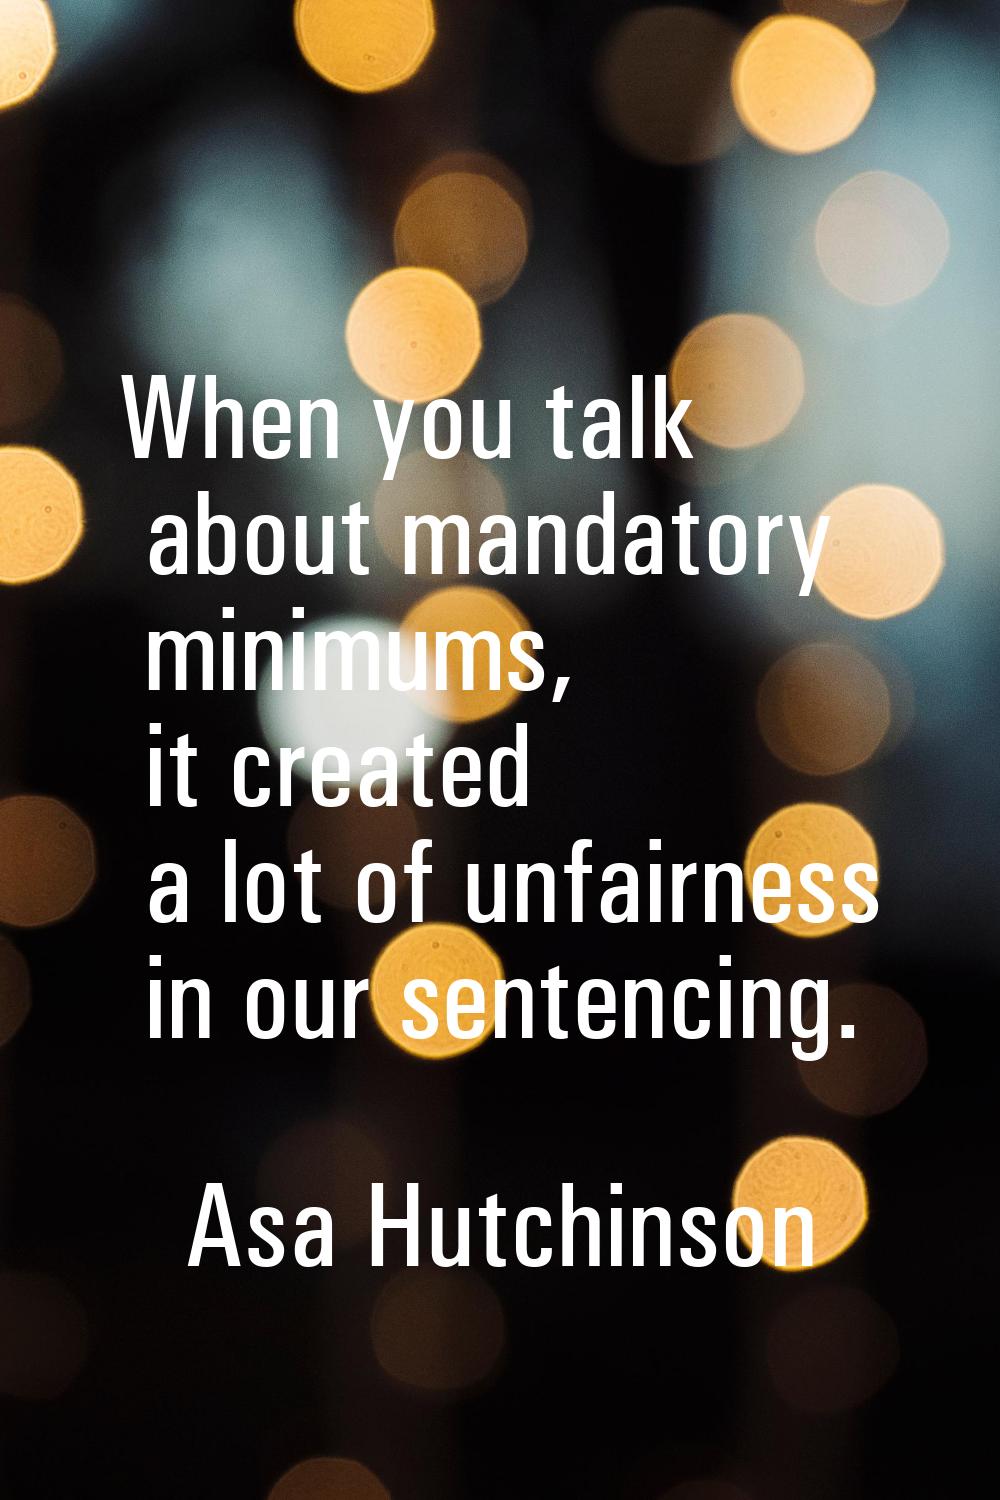 When you talk about mandatory minimums, it created a lot of unfairness in our sentencing.